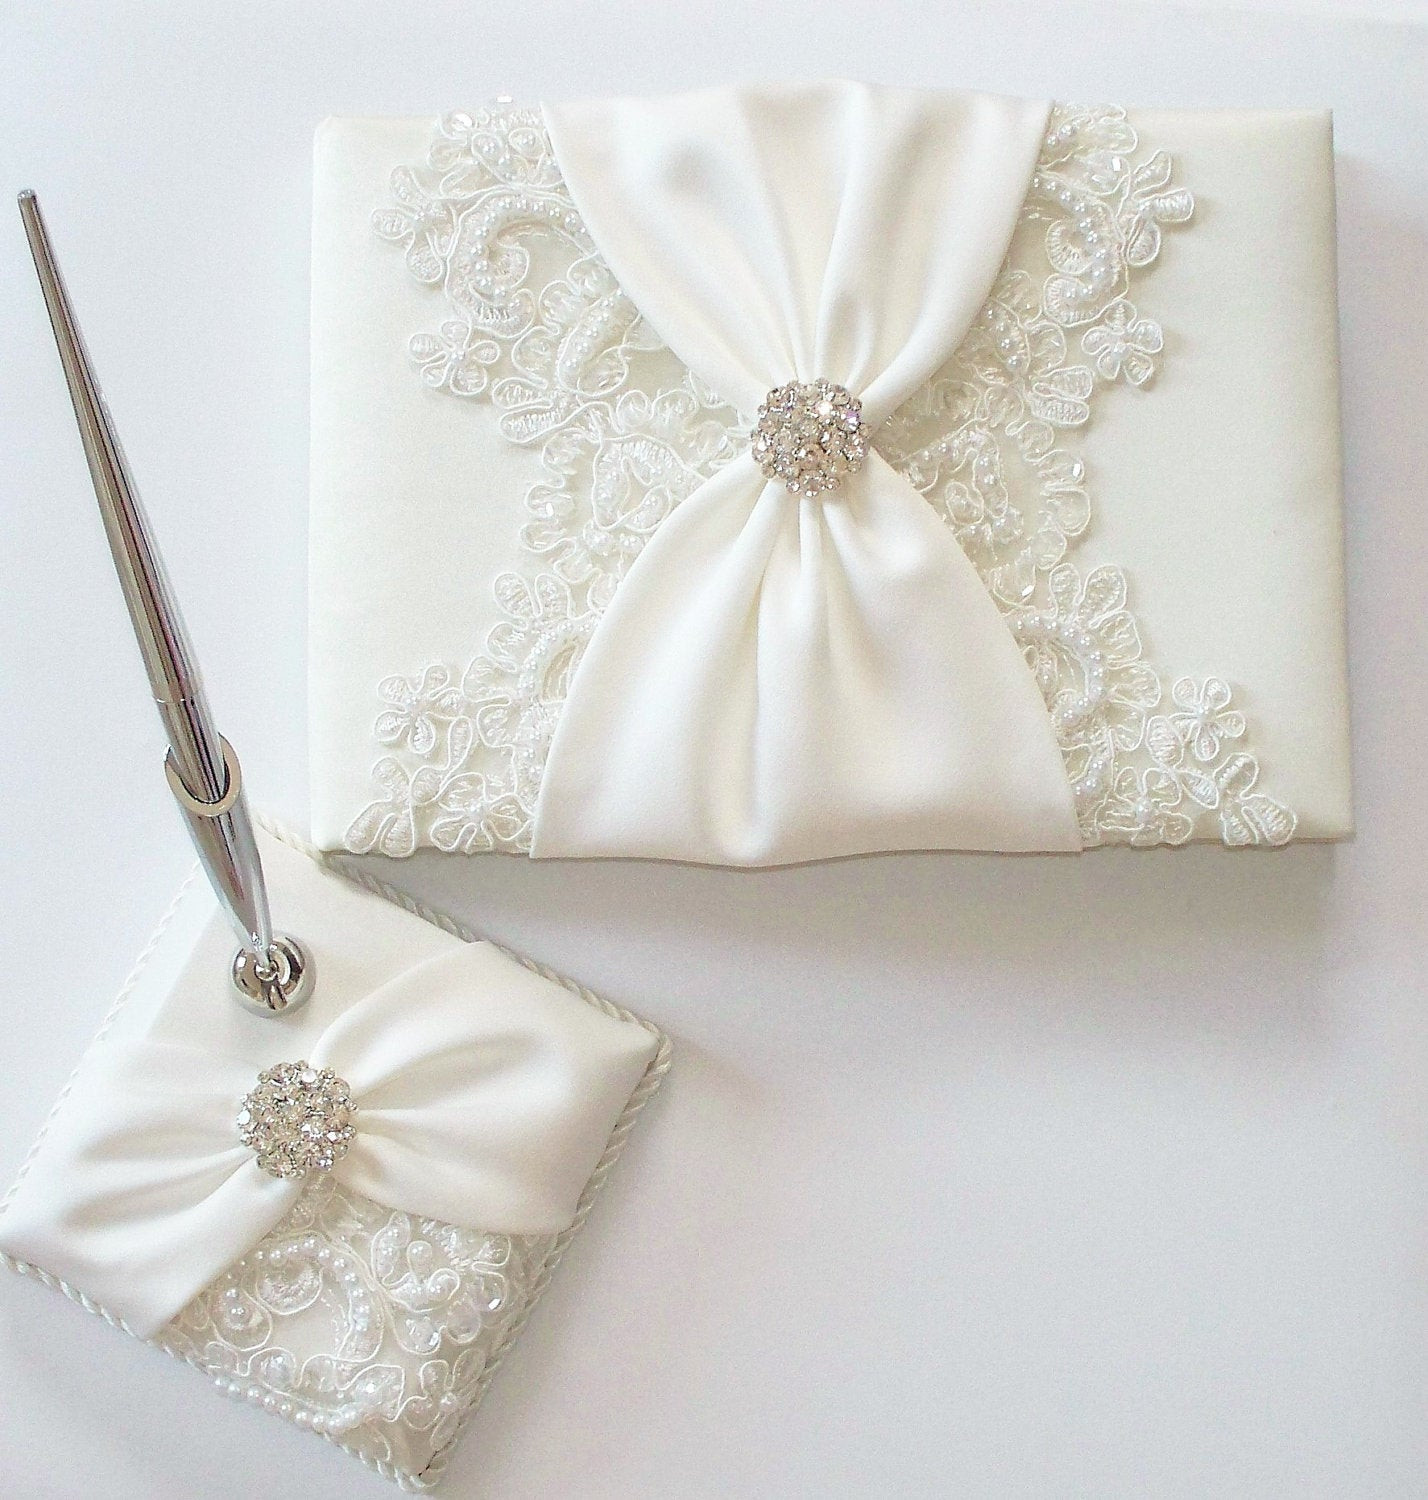 Wedding Guest Book And Pen
 Wedding Guest Book and Pen Set with Beaded Alencon Lace Ivory